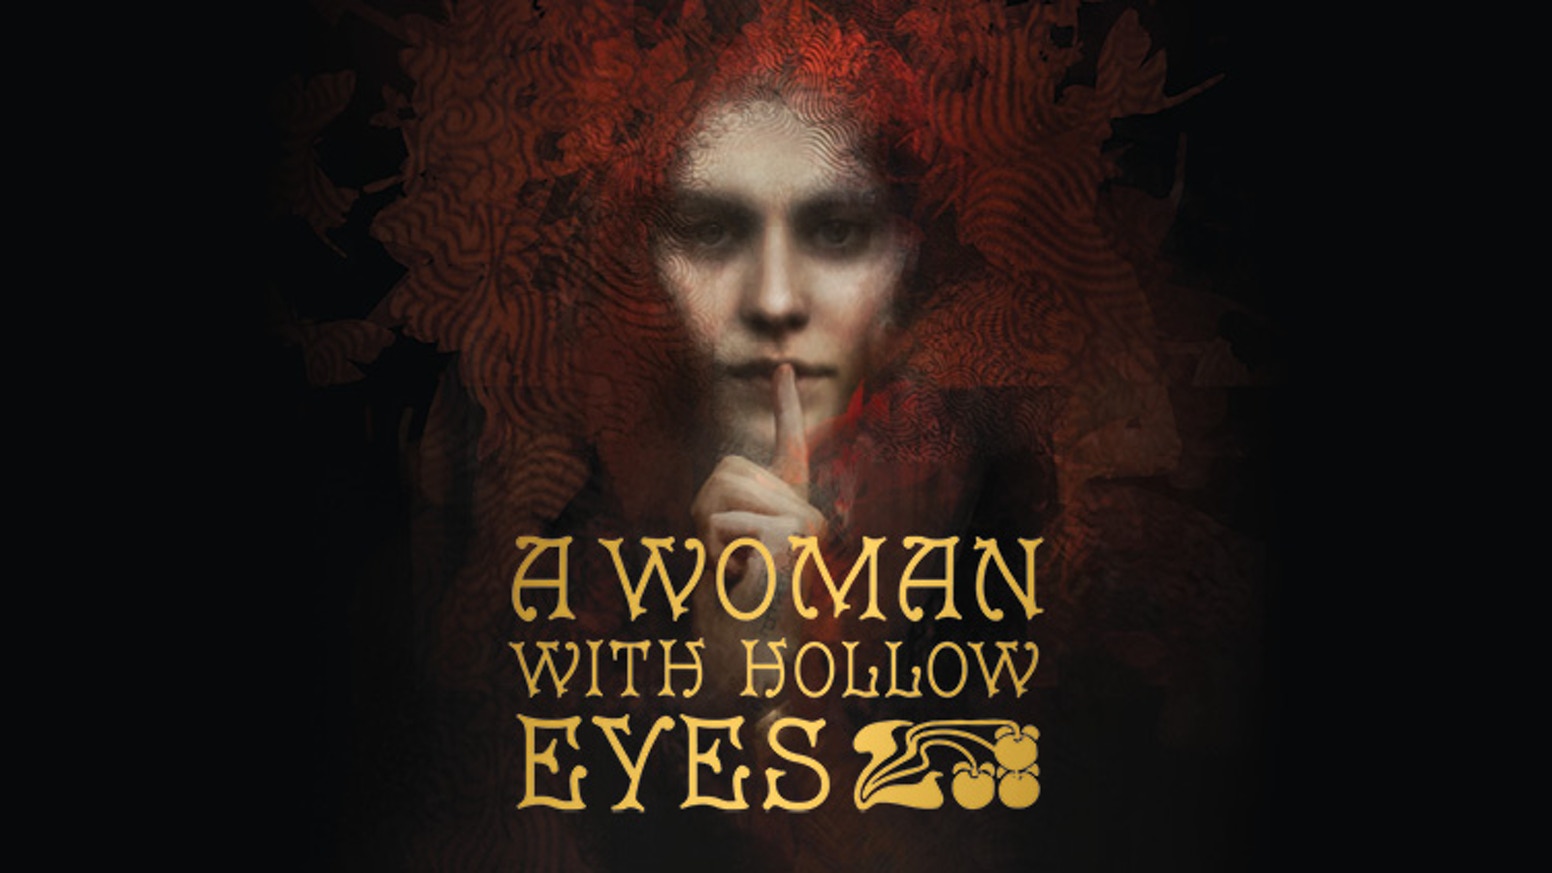 Logo for A Woman with Hollow Eyes — Art Nouveau typography atop a painterly image of an enigmatic woman shushing with a single finger to her mouth.